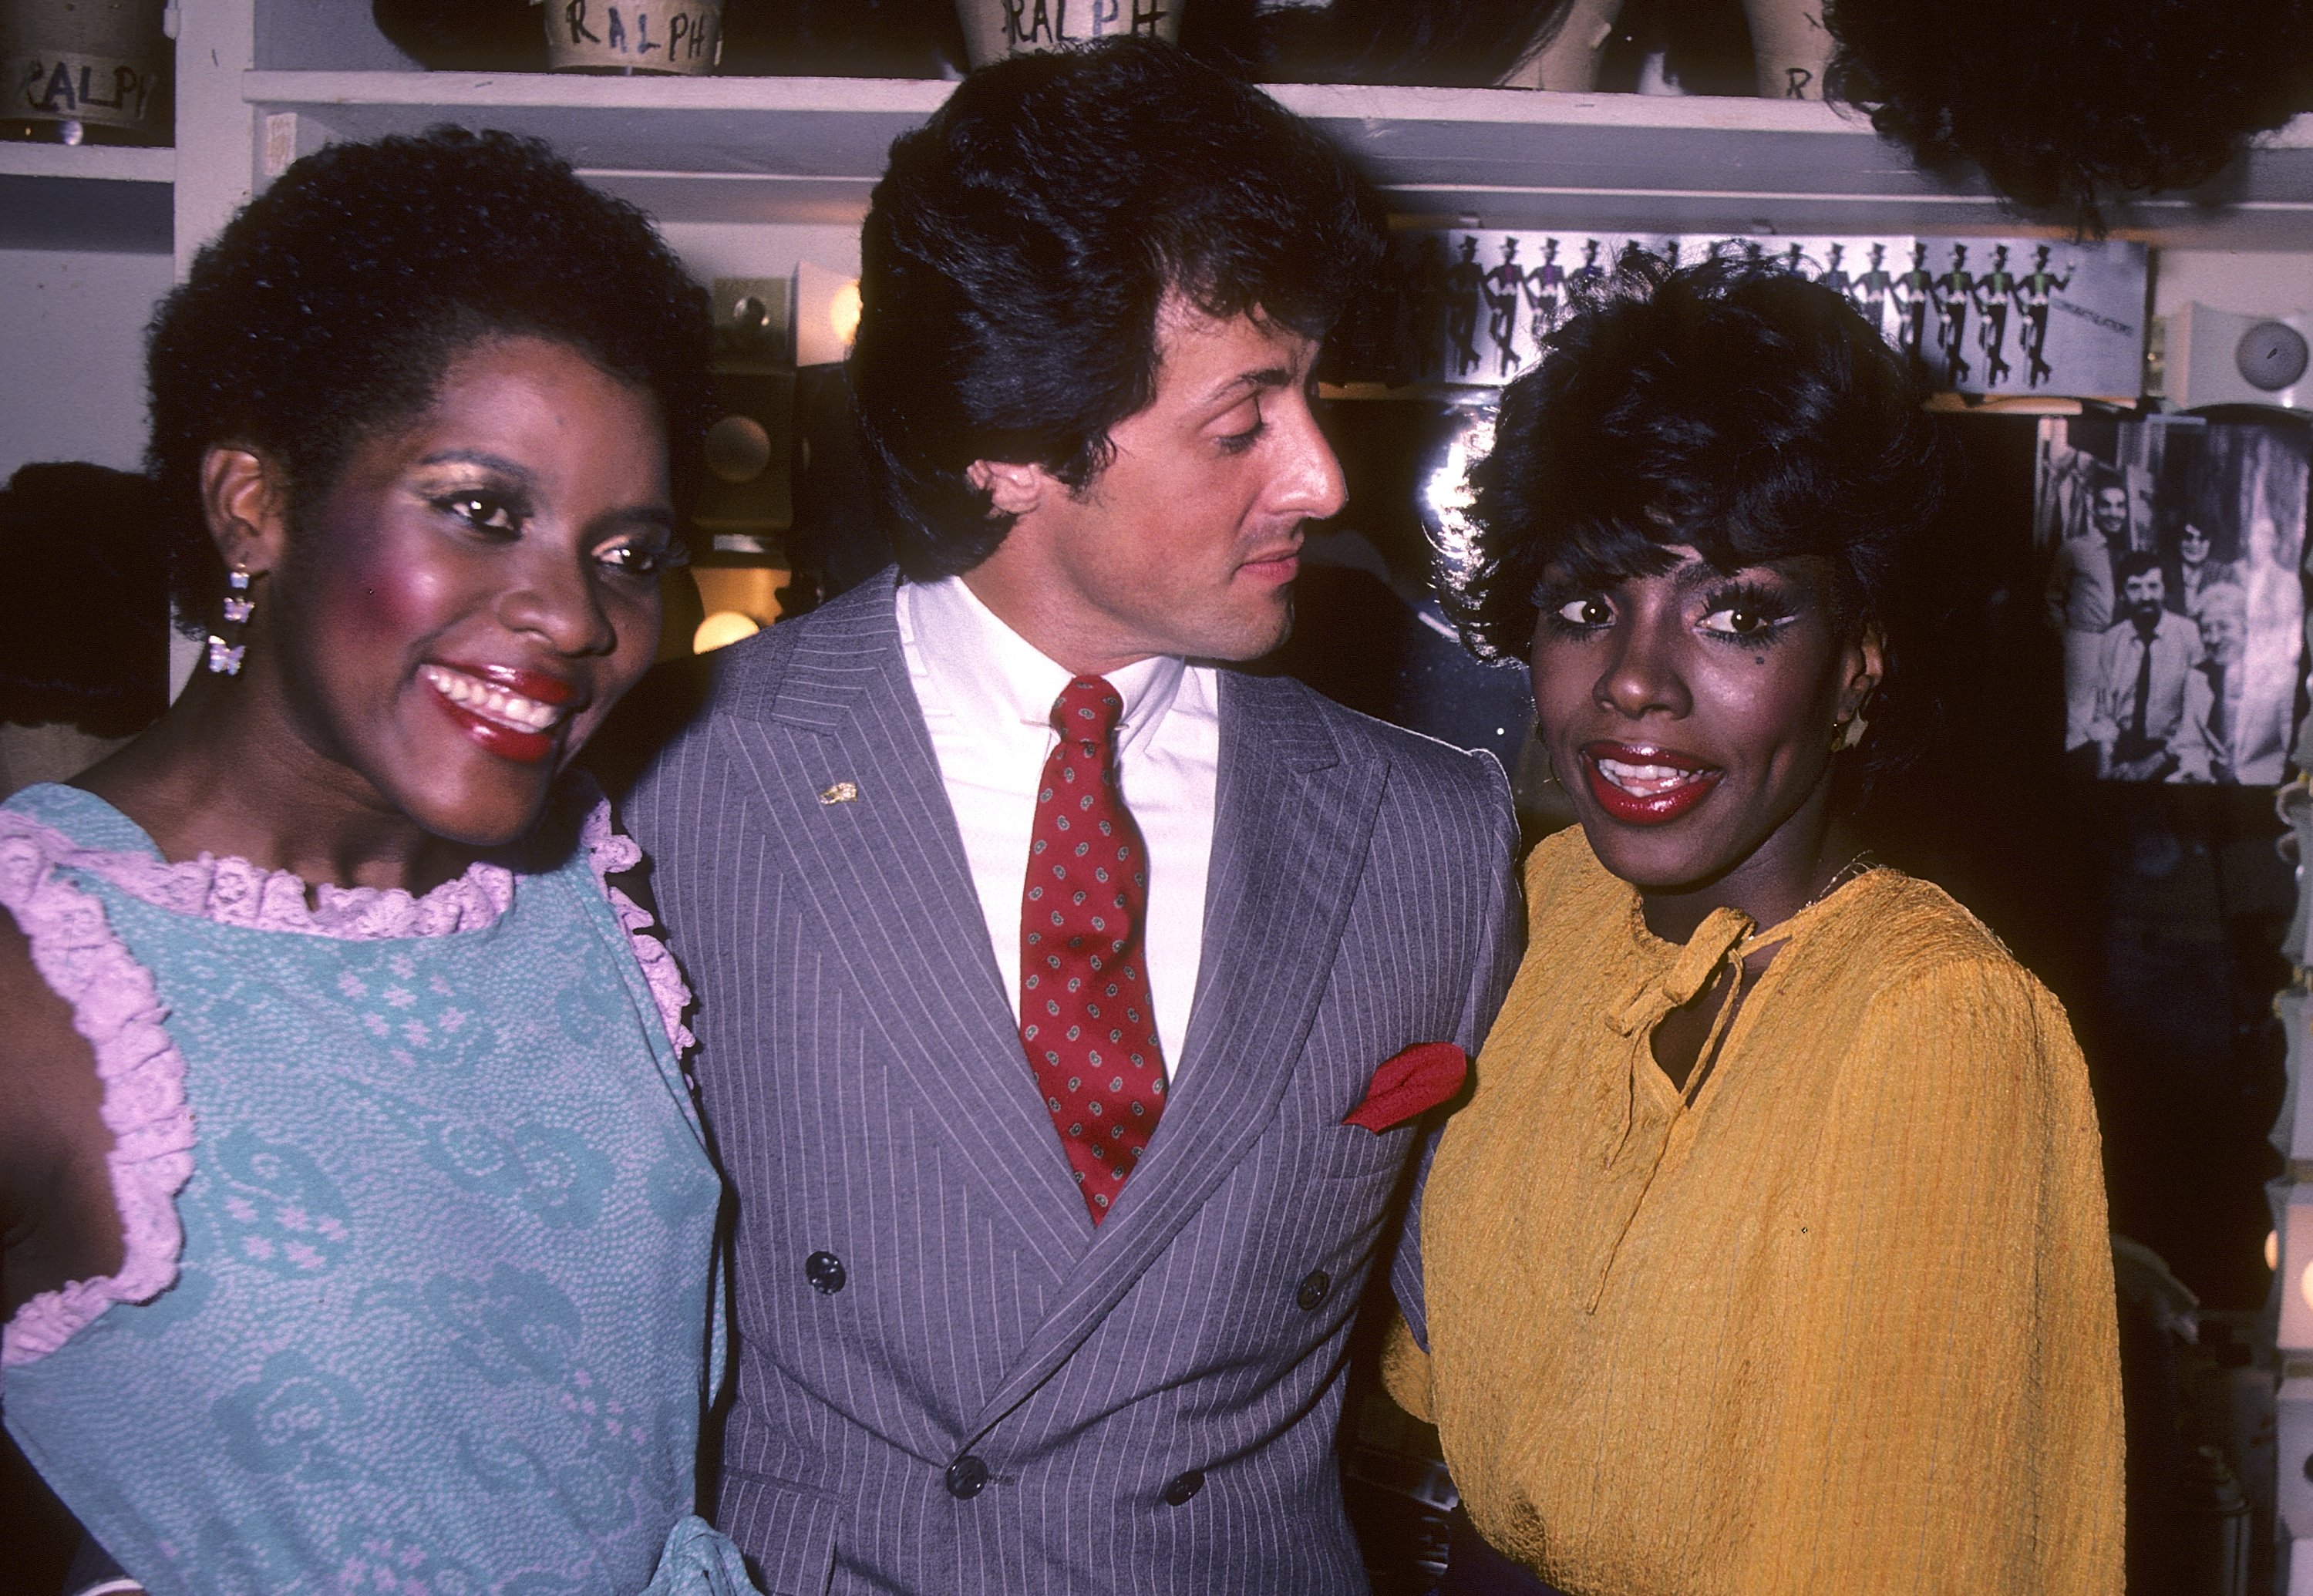 Loretta Devine, Sylvester Stallone and Sheryl Lee Ralph backstage after a performance of the Broadway musical "Dreamgirls" on September 14, 1982, at the Imperial Theatre, in New York City. | Source: Getty Images